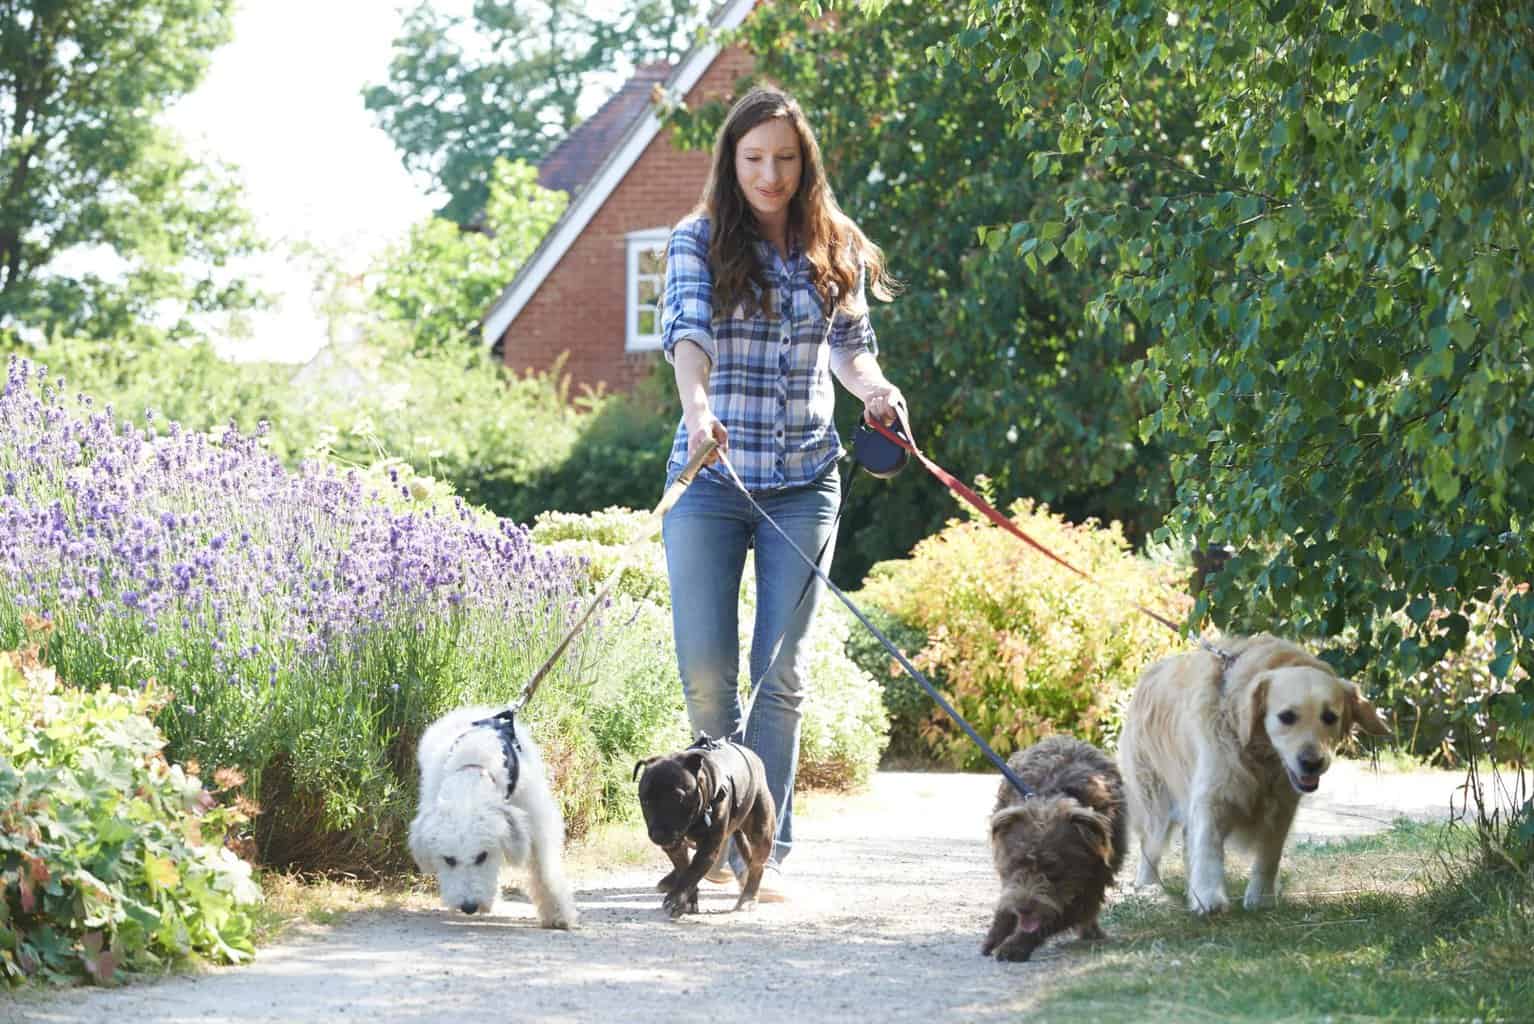 Woman walks four dogs. Owning a dog walking business, or any pet-based business, is a great way to monetize your love of animals.